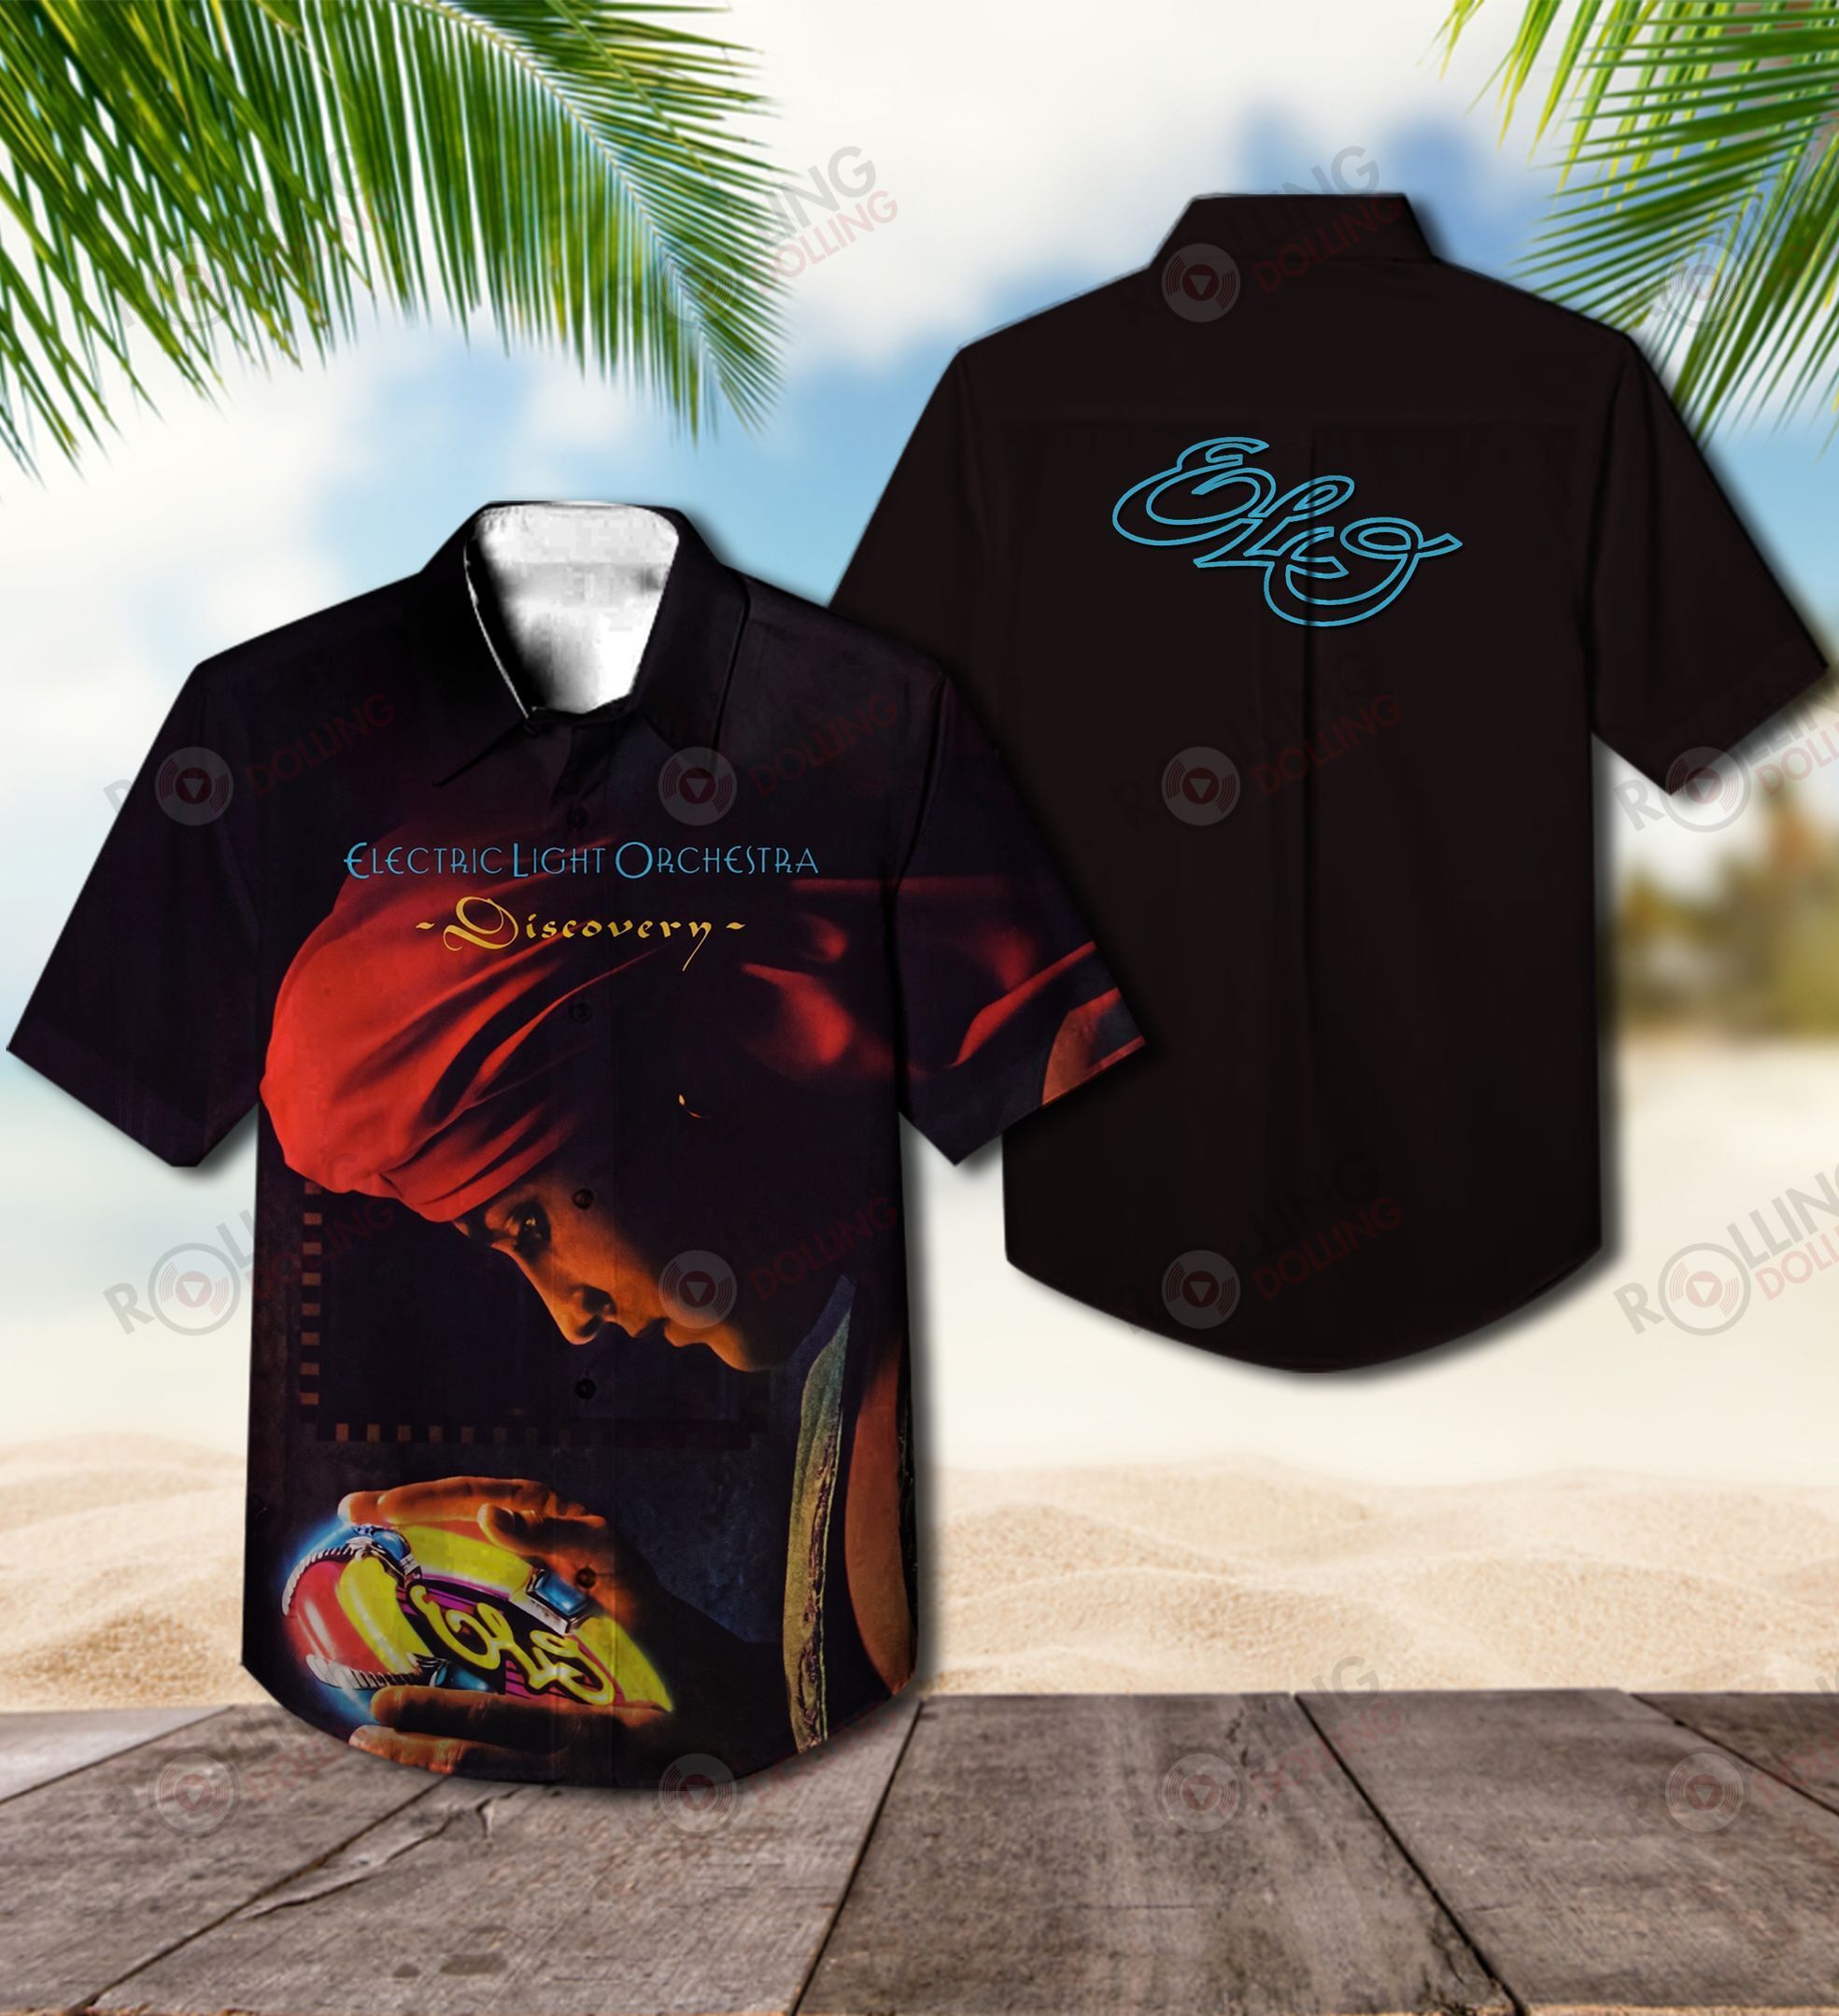 This would make a great gift for any fan who loves Hawaiian Shirt as well as Rock band 130